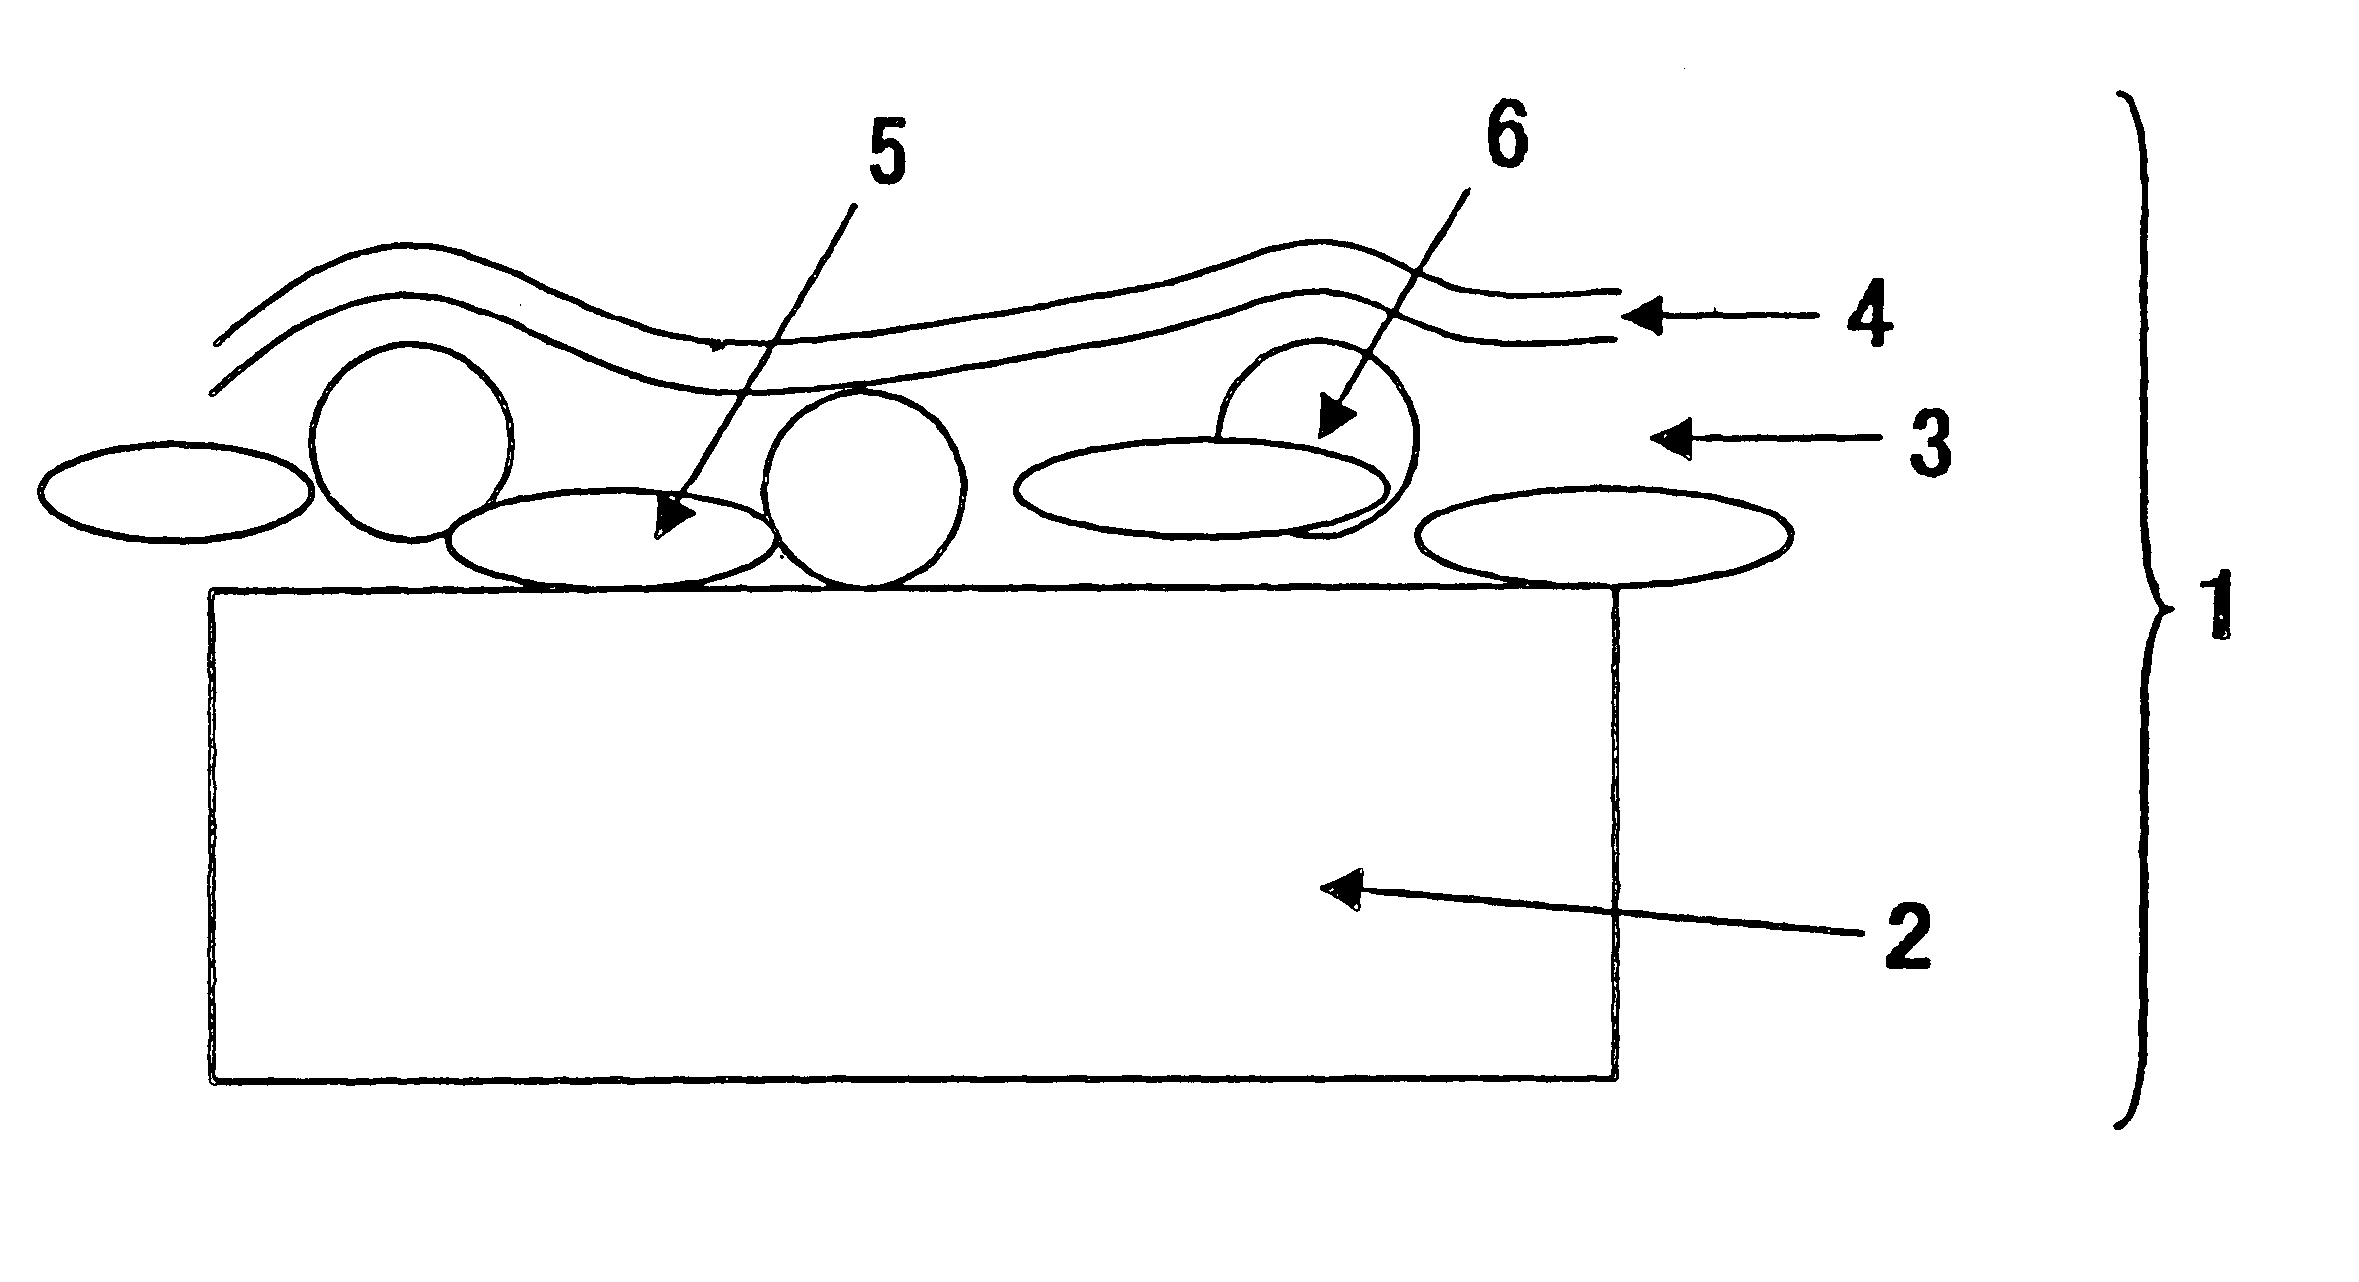 Diffusing film comprising transparent resin and scatterers